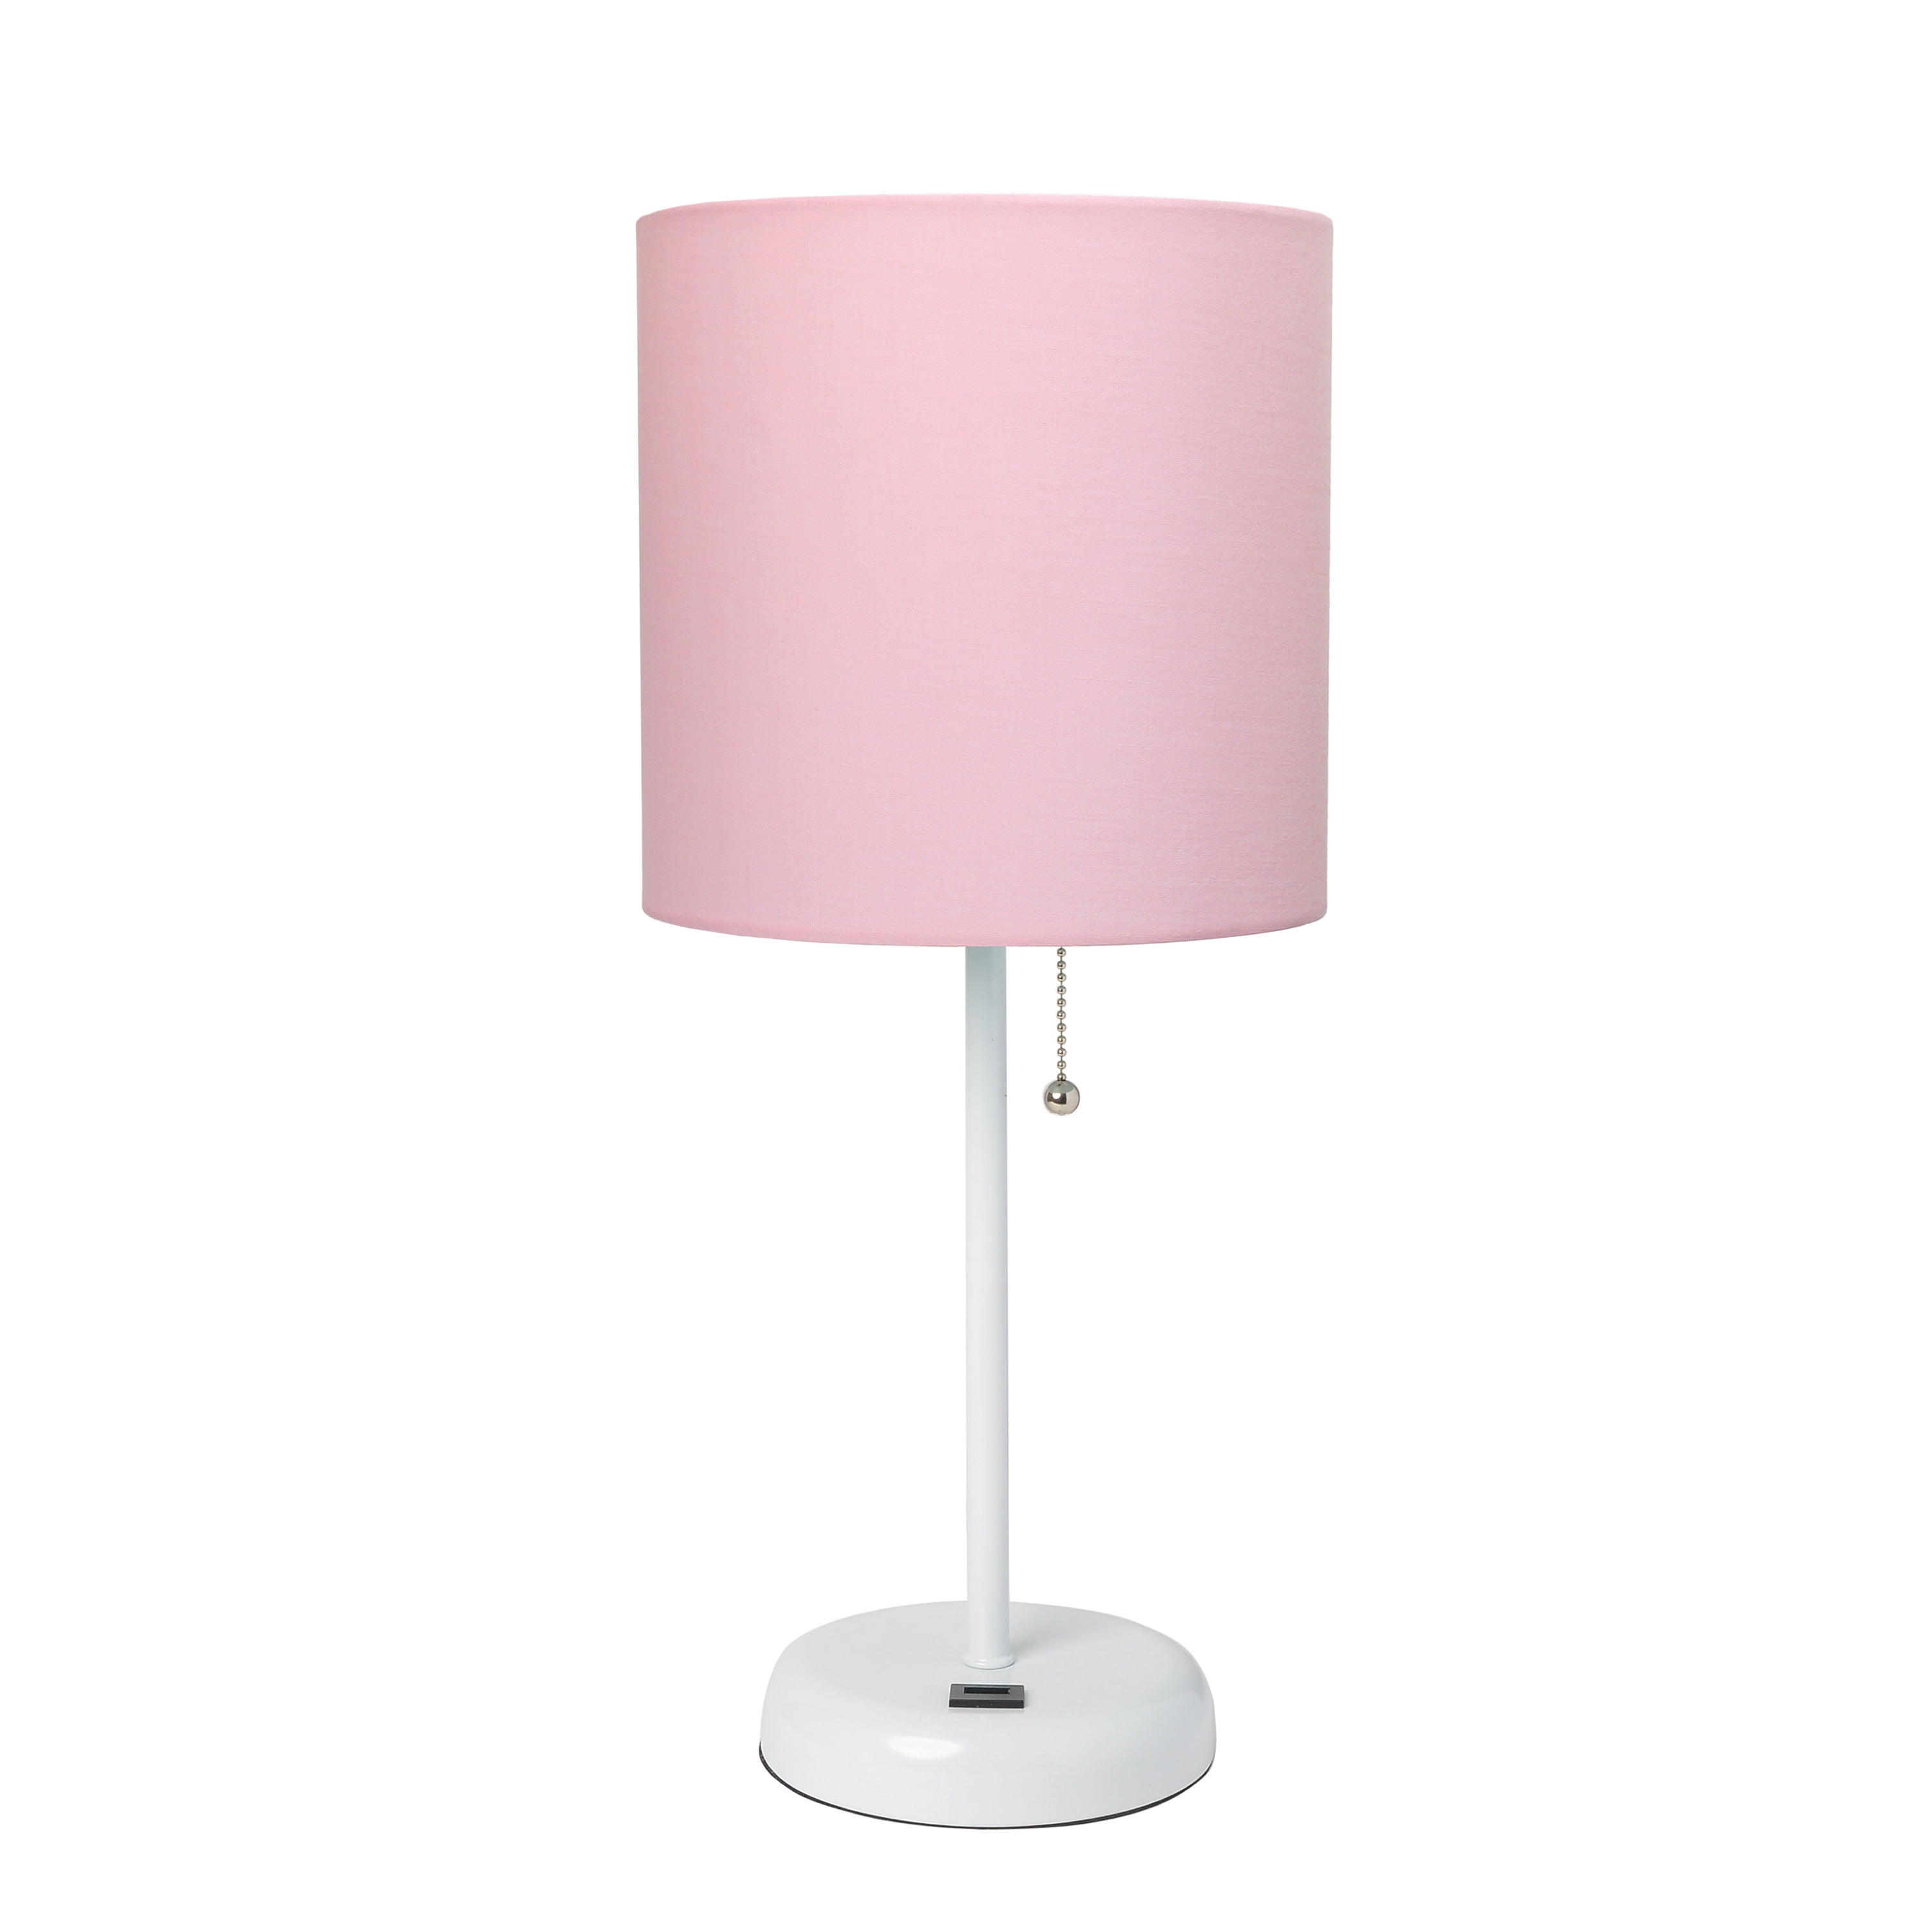 Lt2044-pow White Stick With Usb Charging Port & Fabric Shade Table Lamp, Light Pink